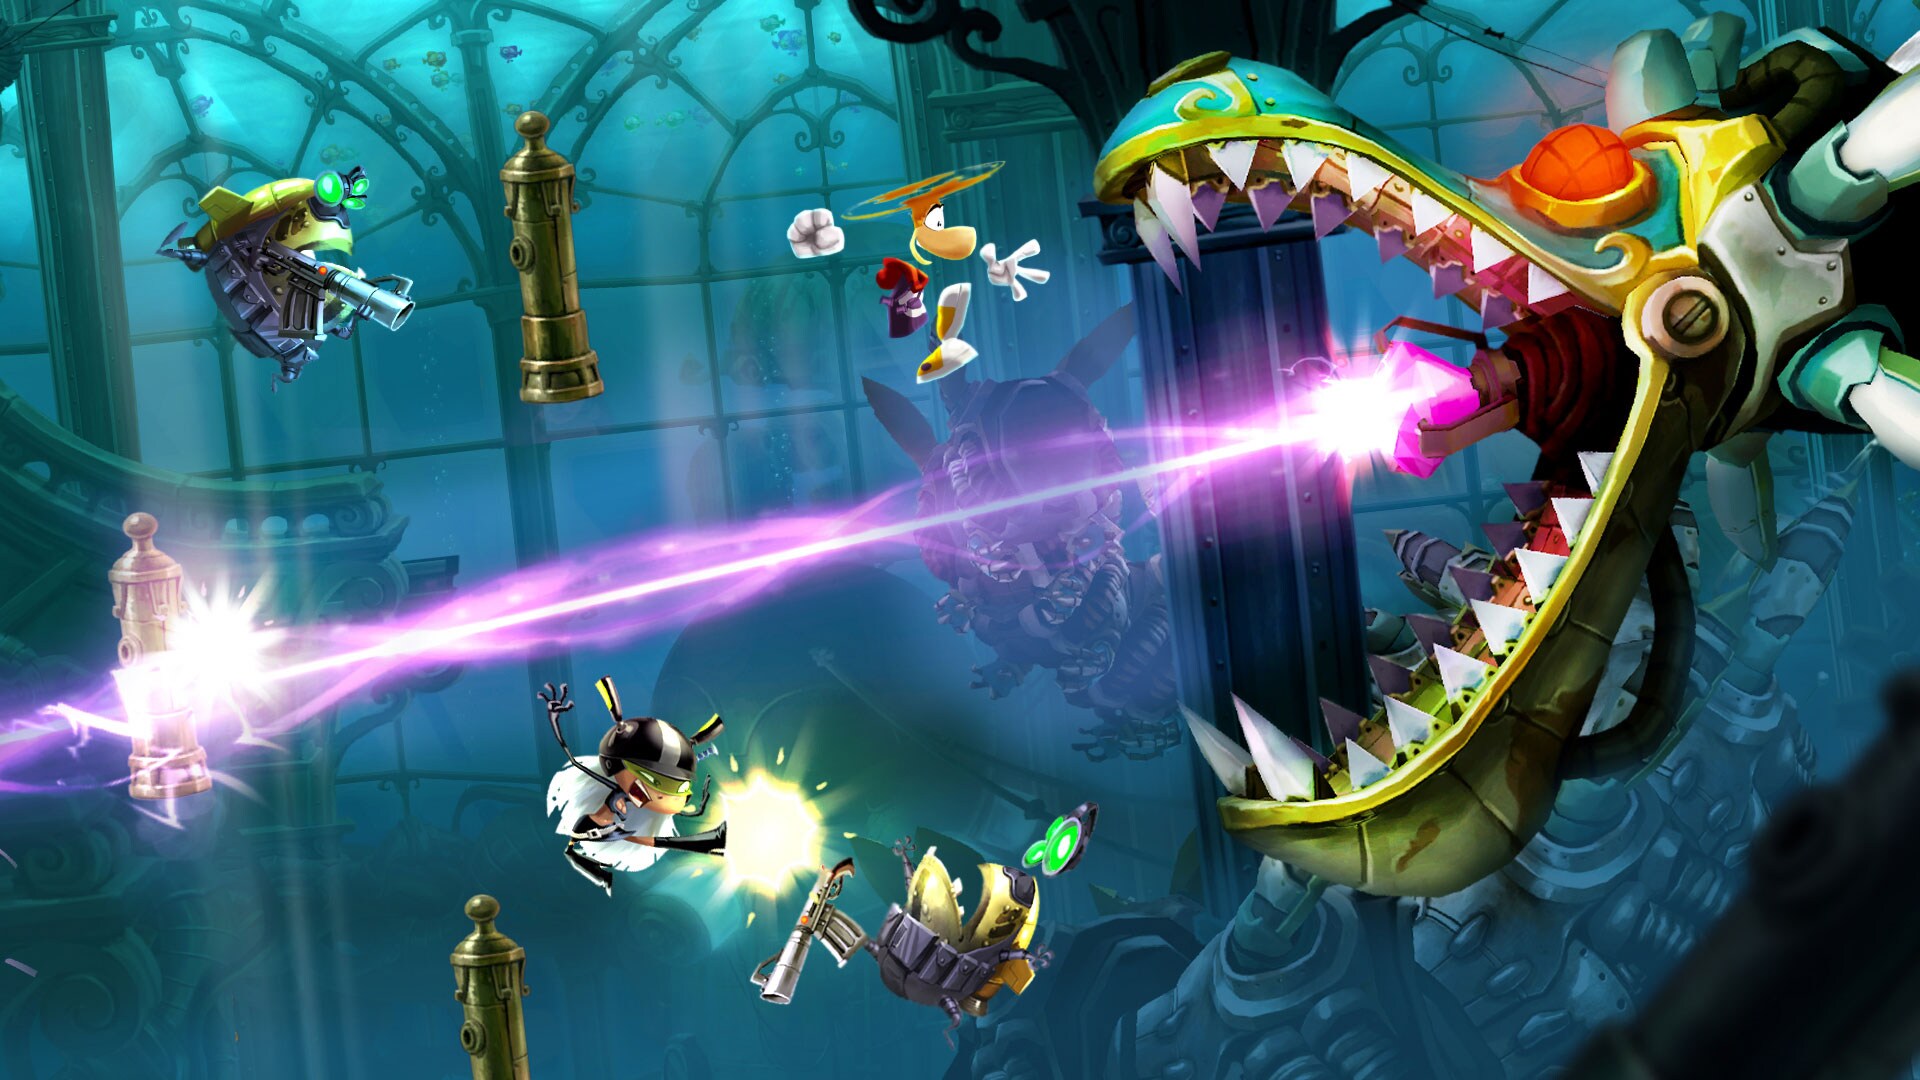 Rayman Legends – 10 years on from the near perfect platformer